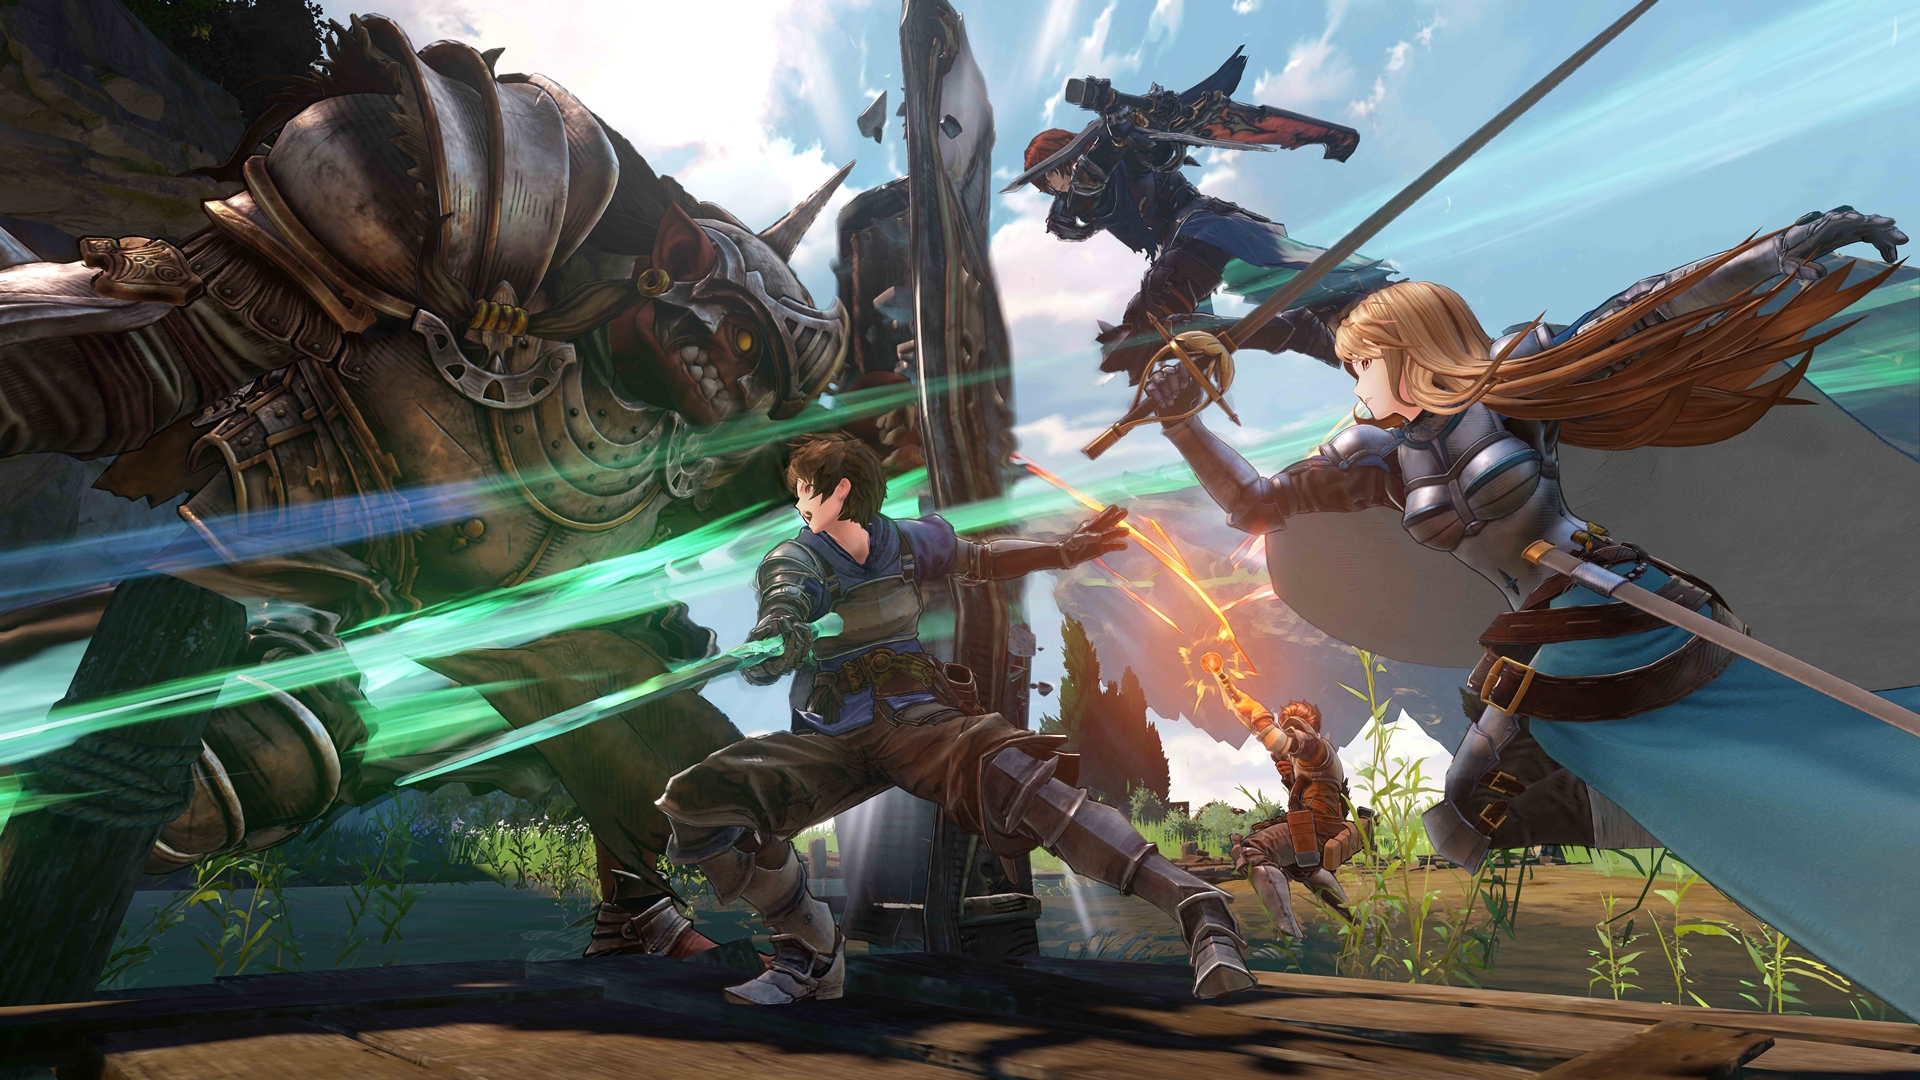 How to play the Granblue Fantasy: Relink demo - Dot Esports